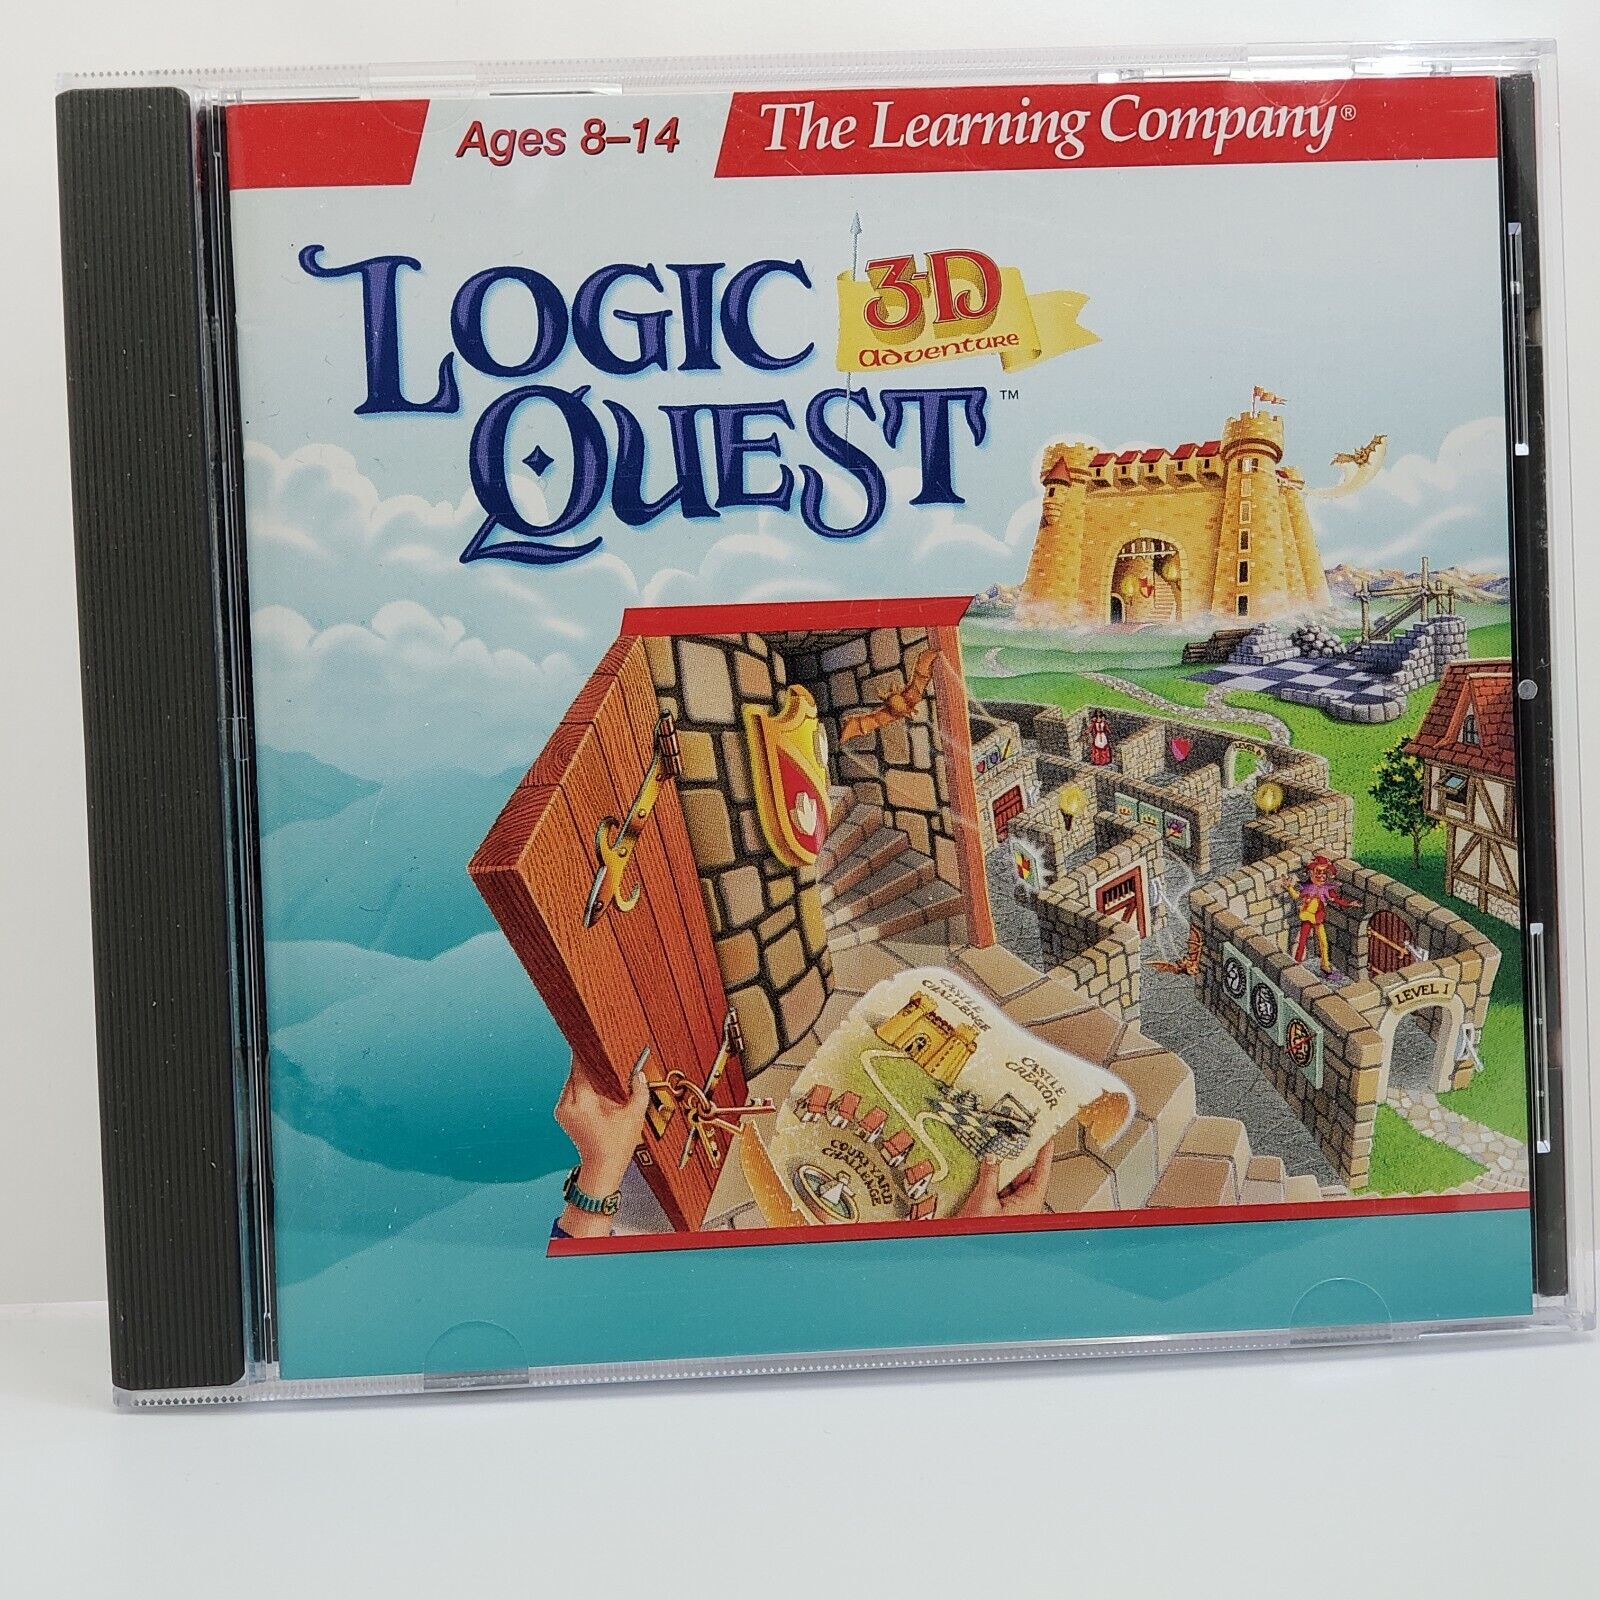 Logic Quest 3D Adventure Ages 8-14 1997 PC CD-ROM by The Learning Company